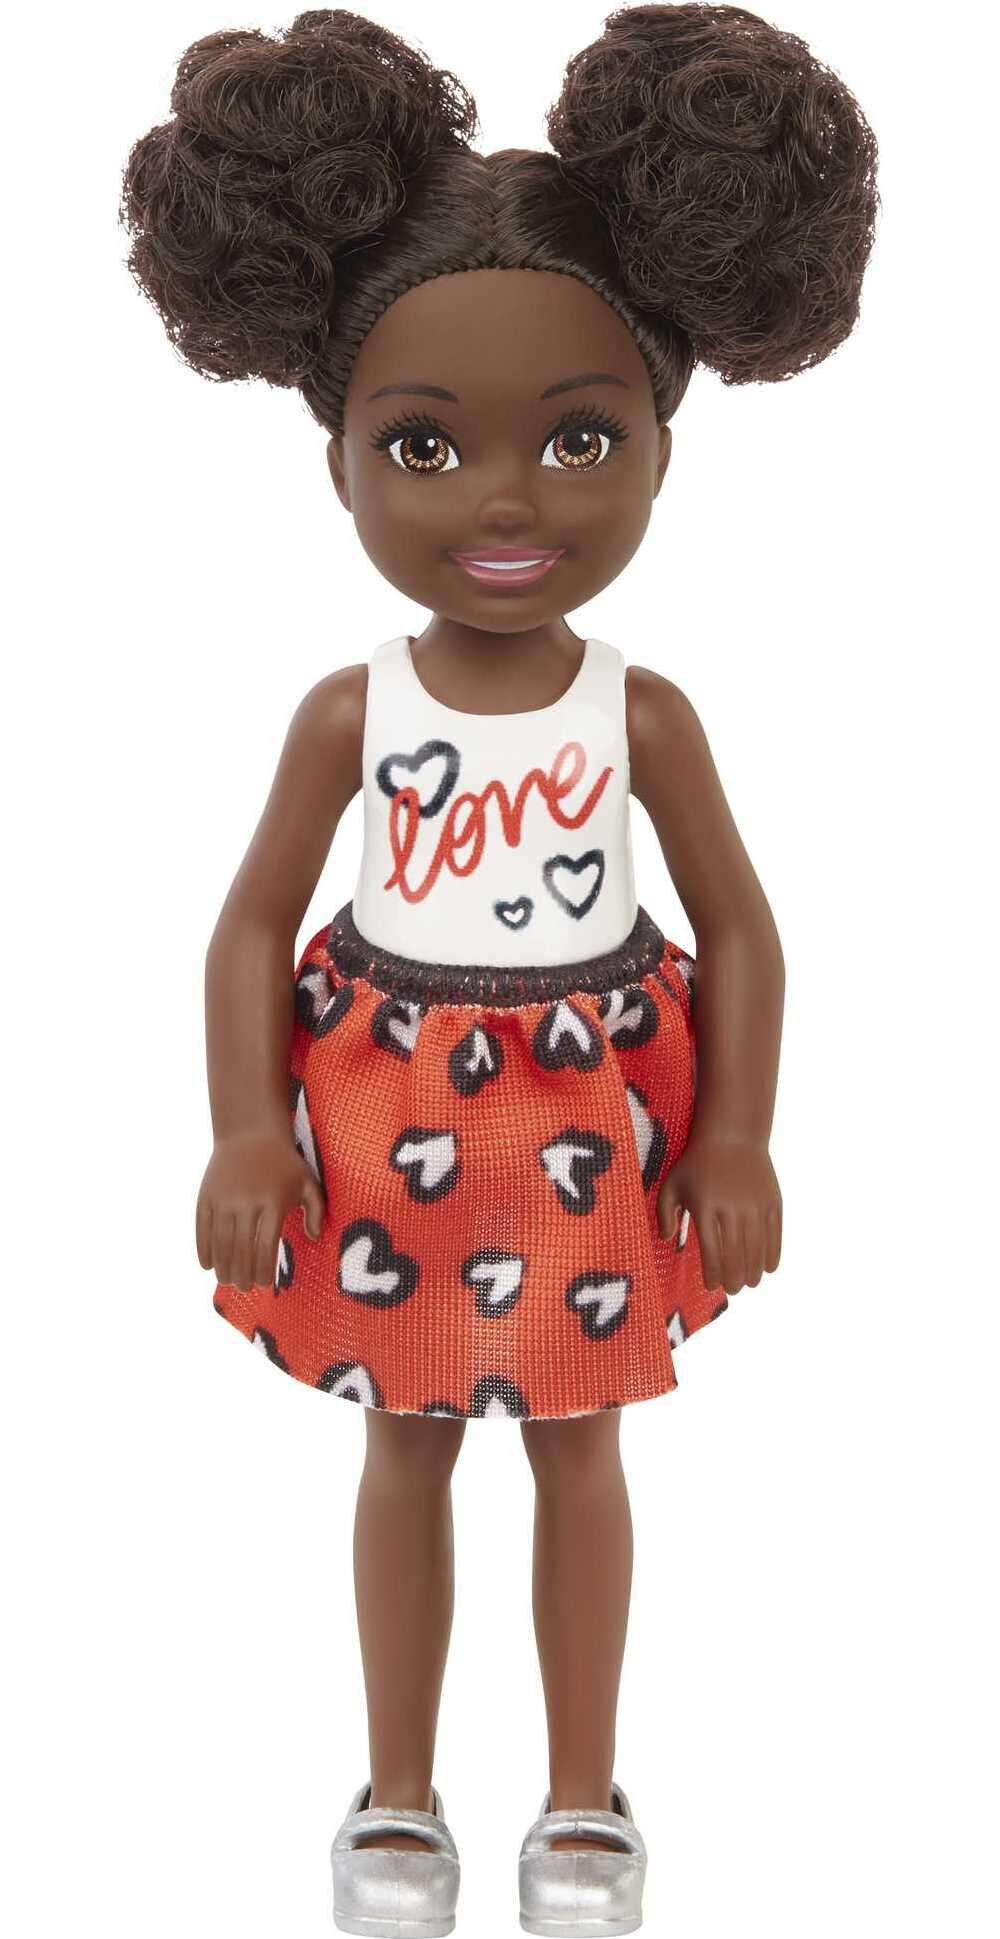 Barbie Chelsea Small Doll with Black Hair in Afro Puffs Wearing Removable Skirt & Silvery Shoes - image 5 of 6